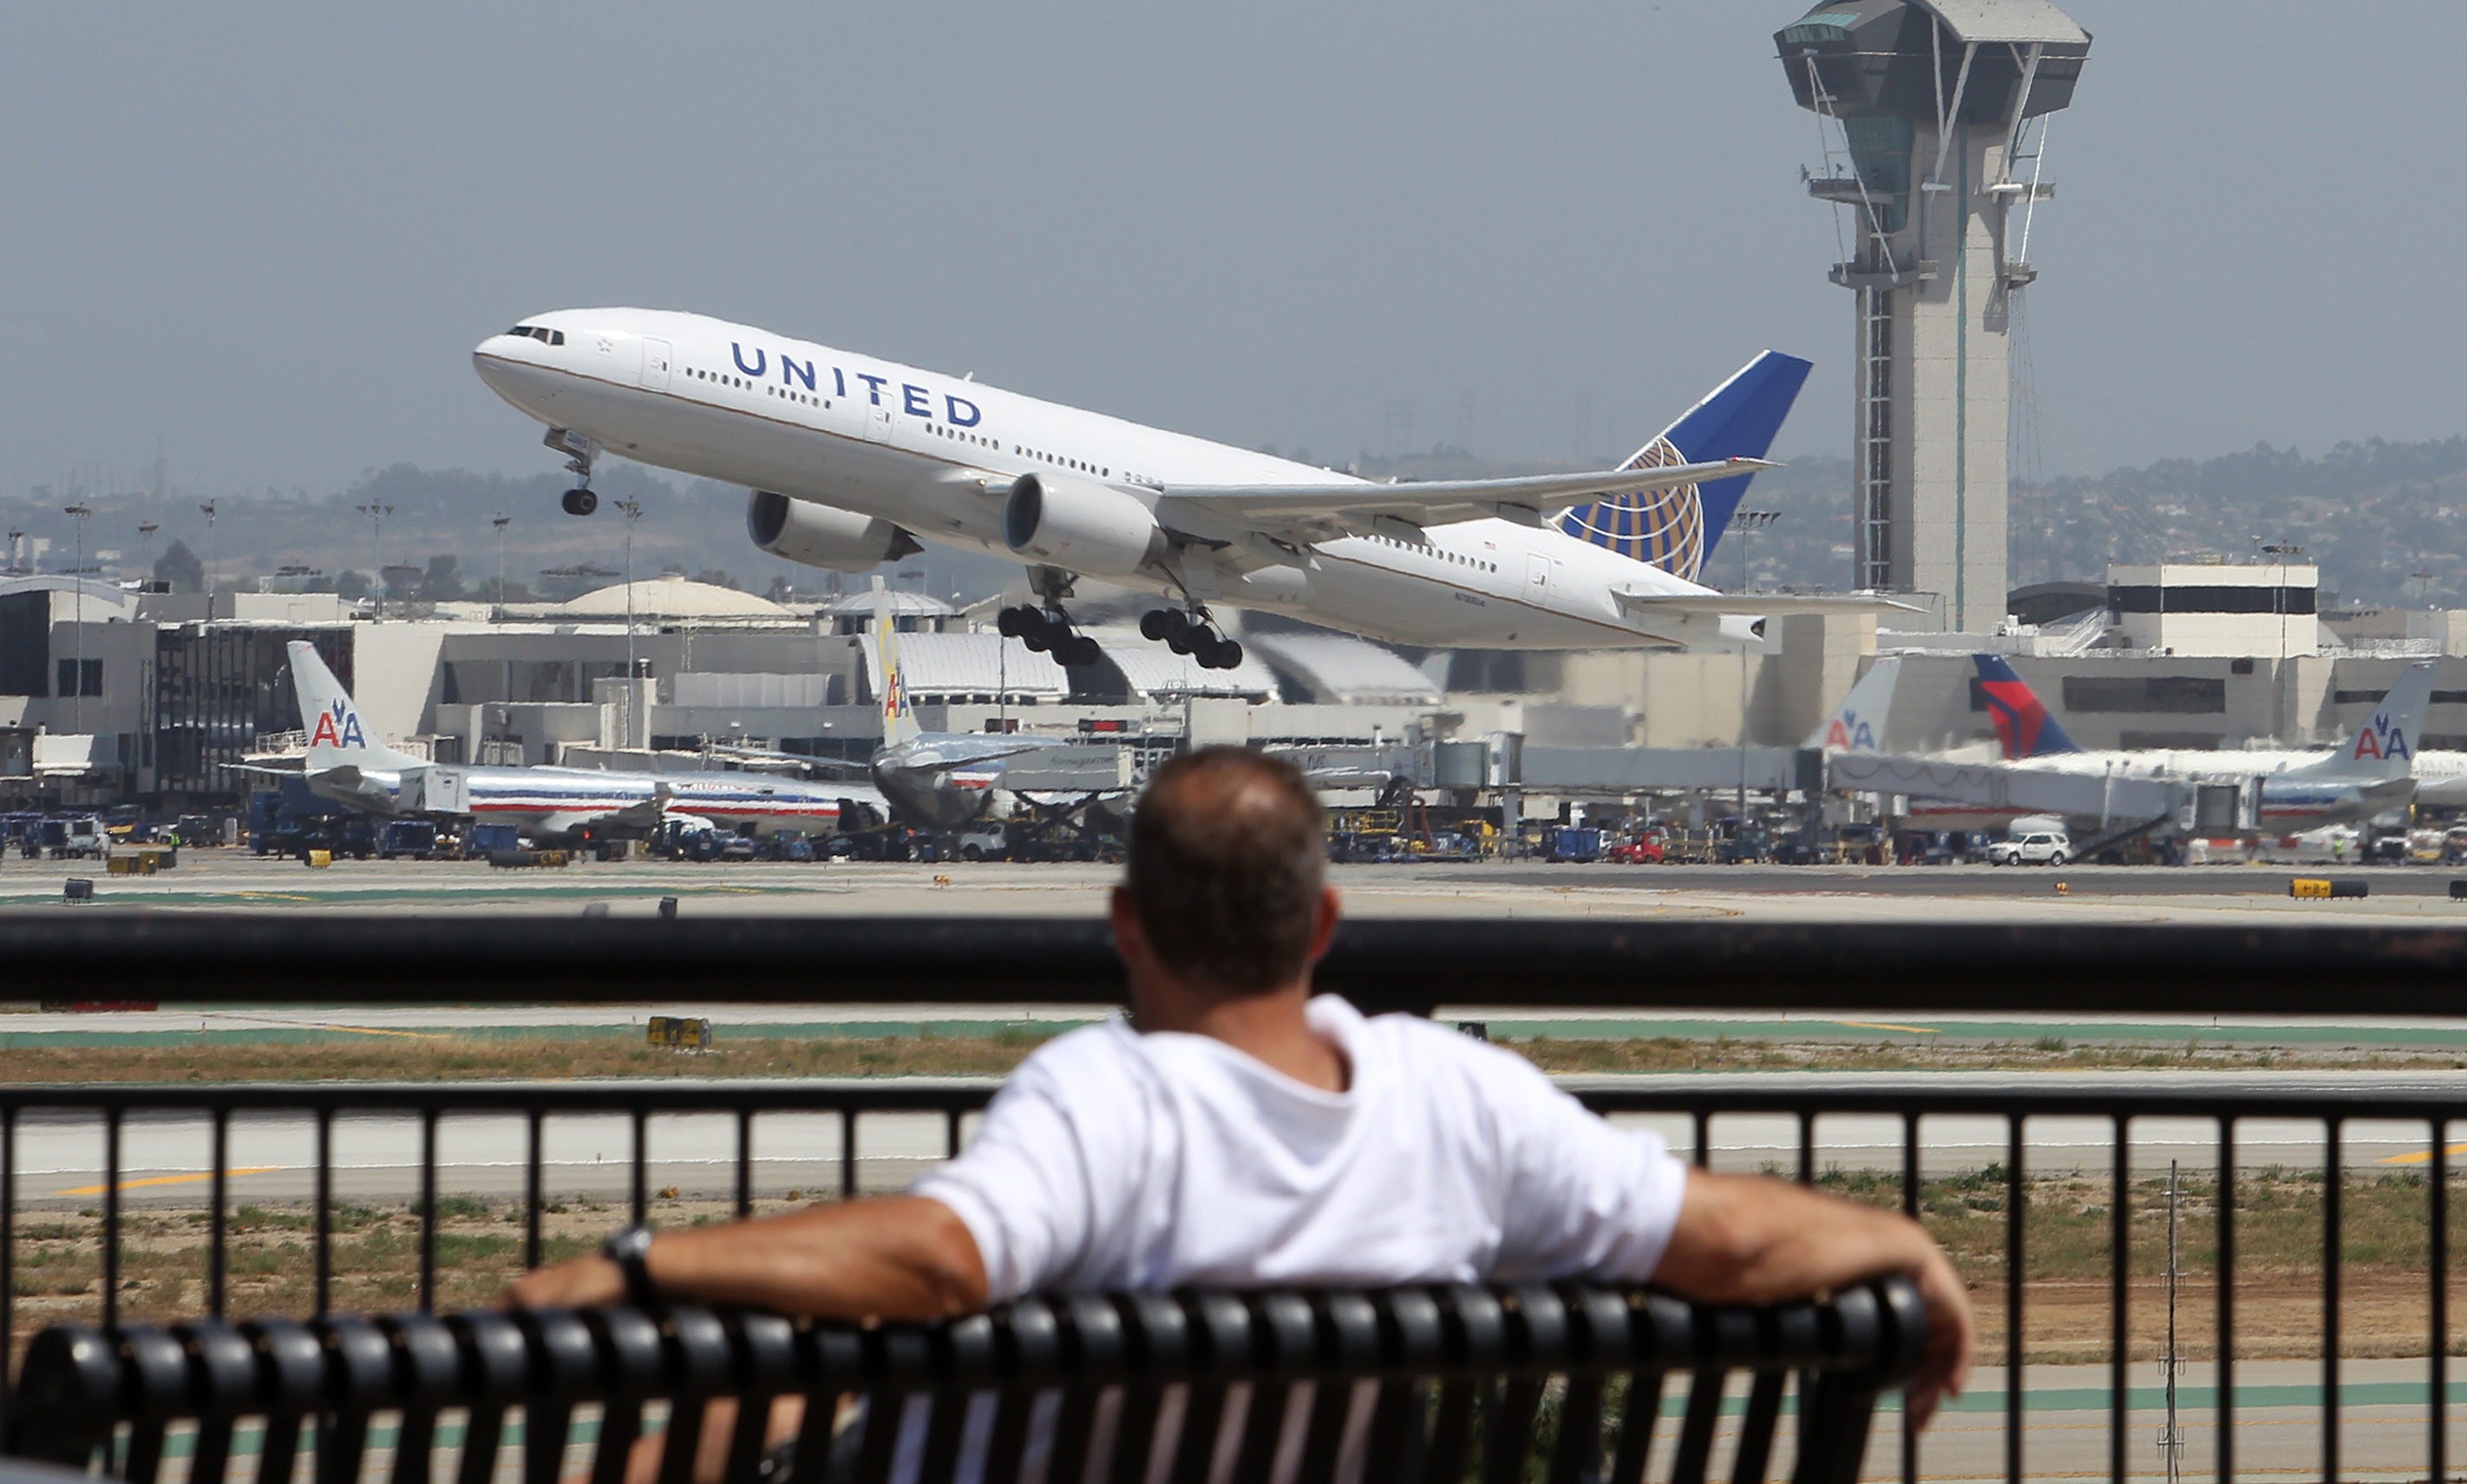 Flight Delays Feared As Sequester Forces Air Traffic Controller Furloughs